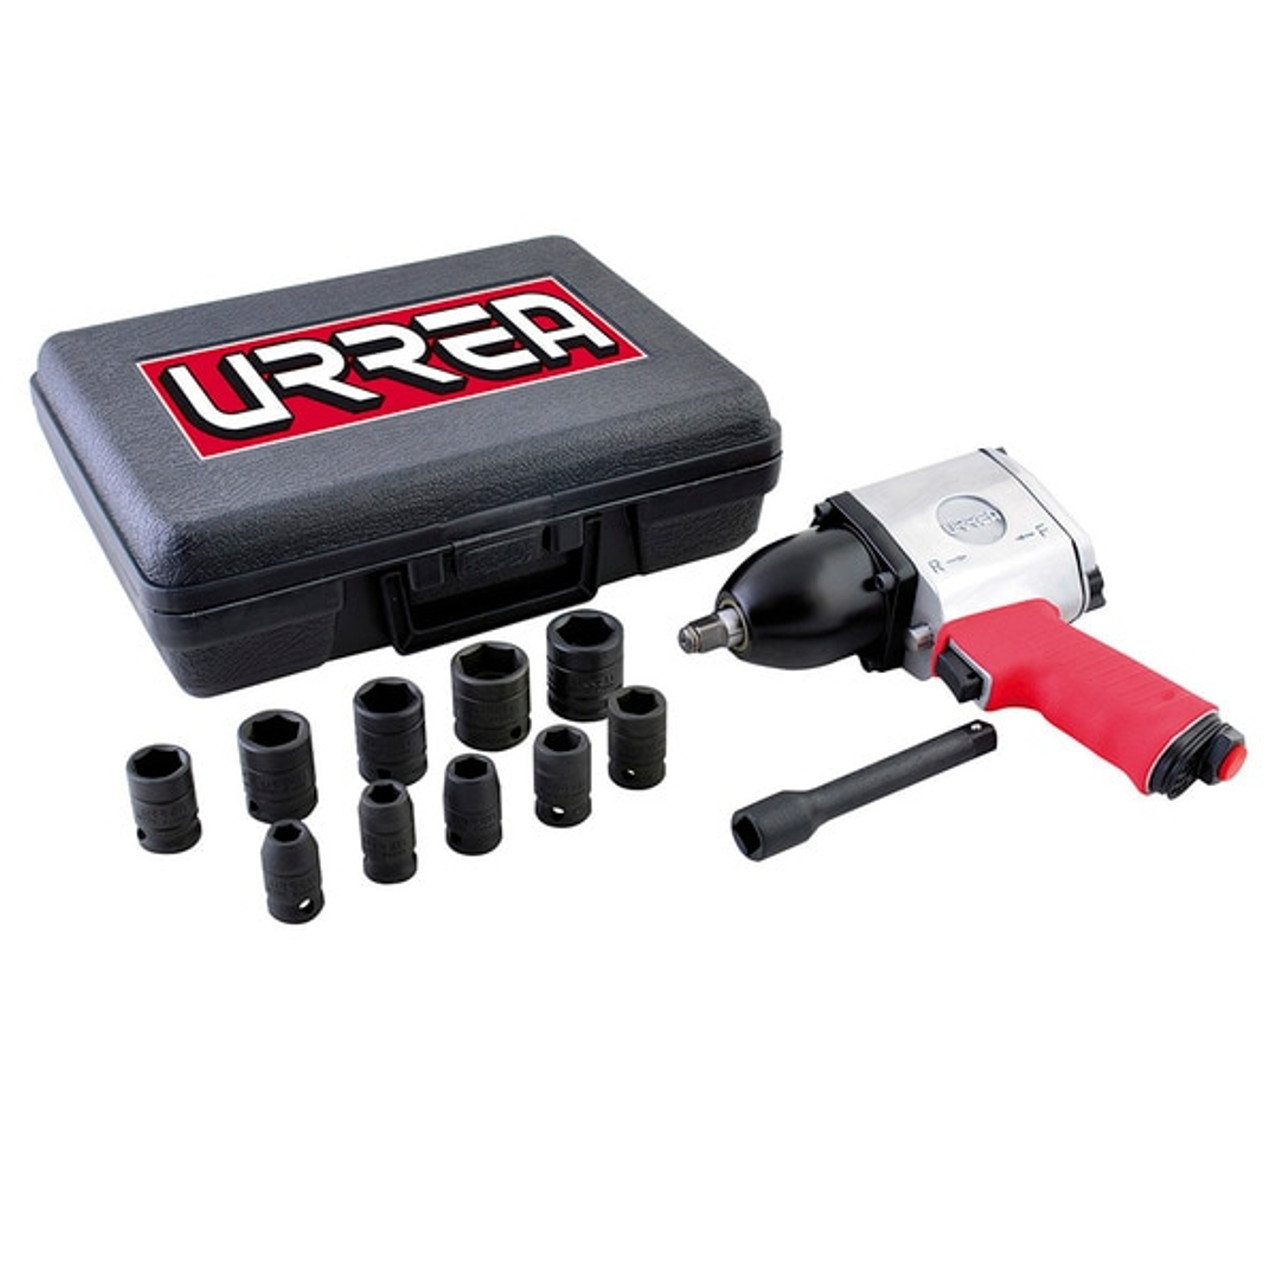 Pin Clutch 1/2" Drive Air Impact Wrench And Socket Set (metric)